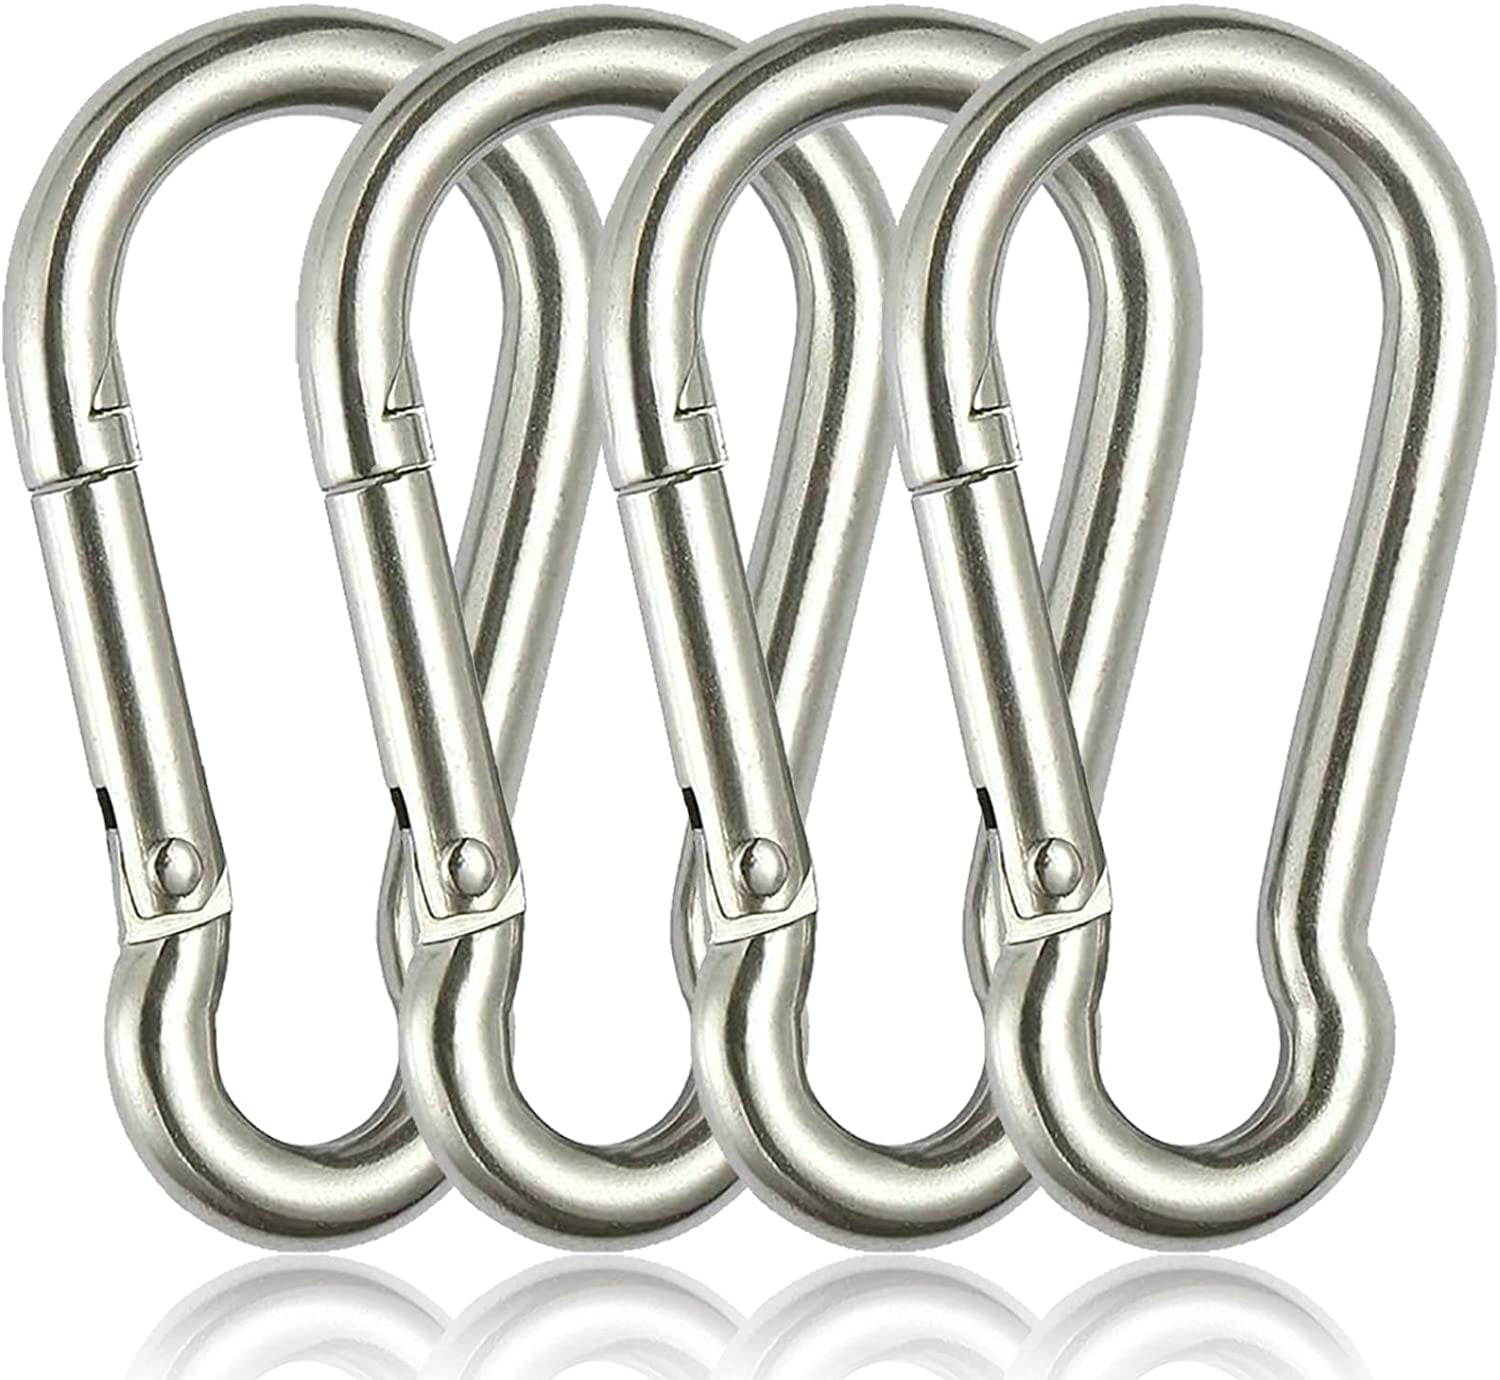 Snap Hook Carabiner Clip Stainless Steel Easy Use Fishing Spring Loaded Sturdy 